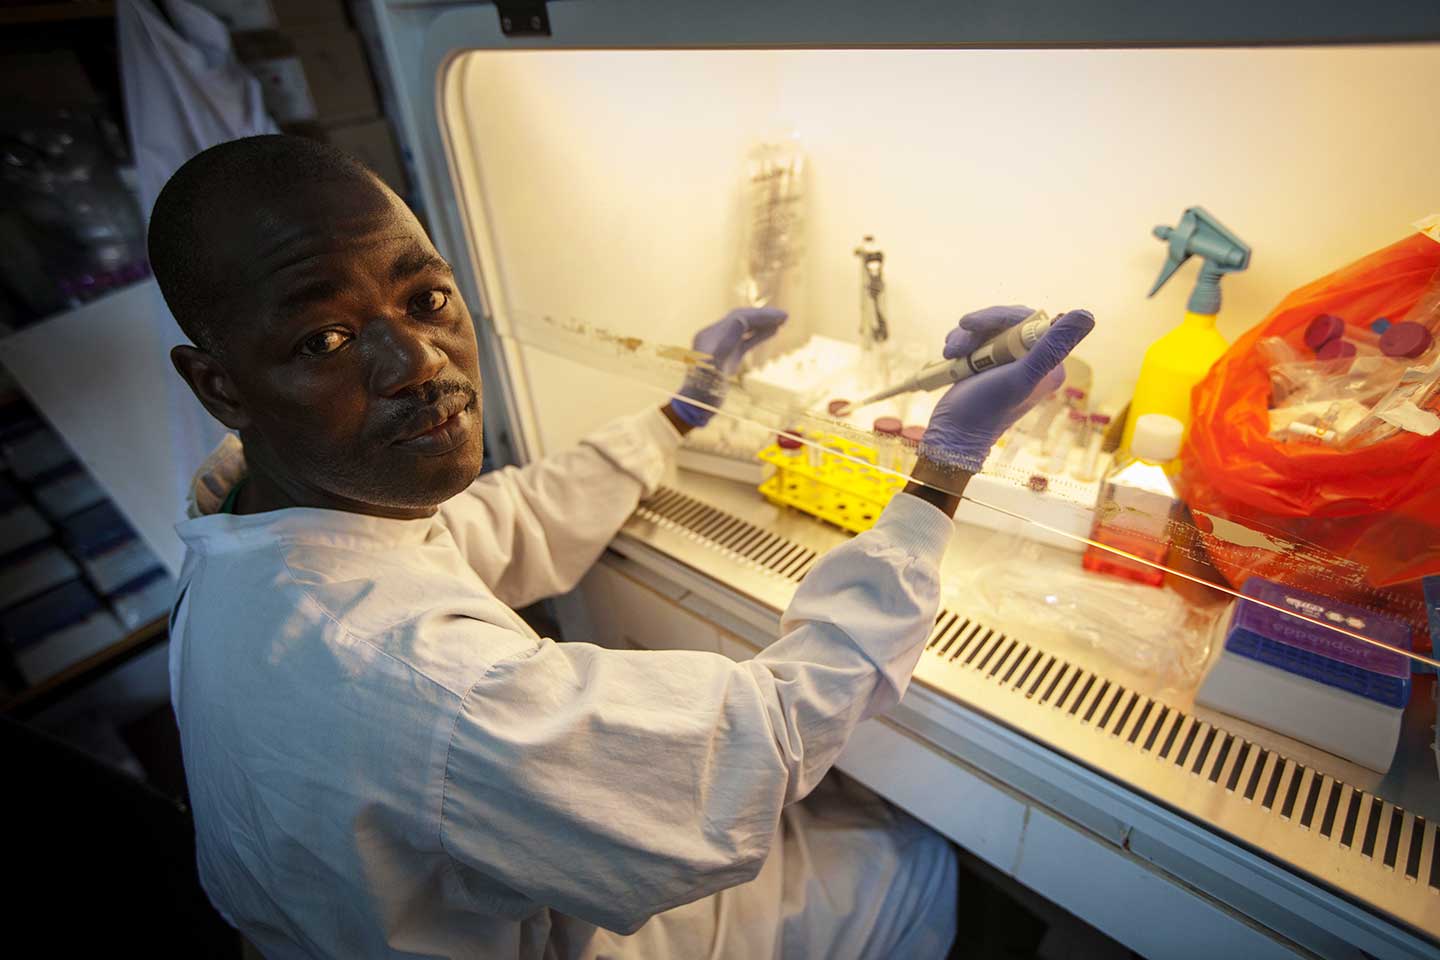 Health worker preparing Ebola vaccine for the Phase III trials in Guinea